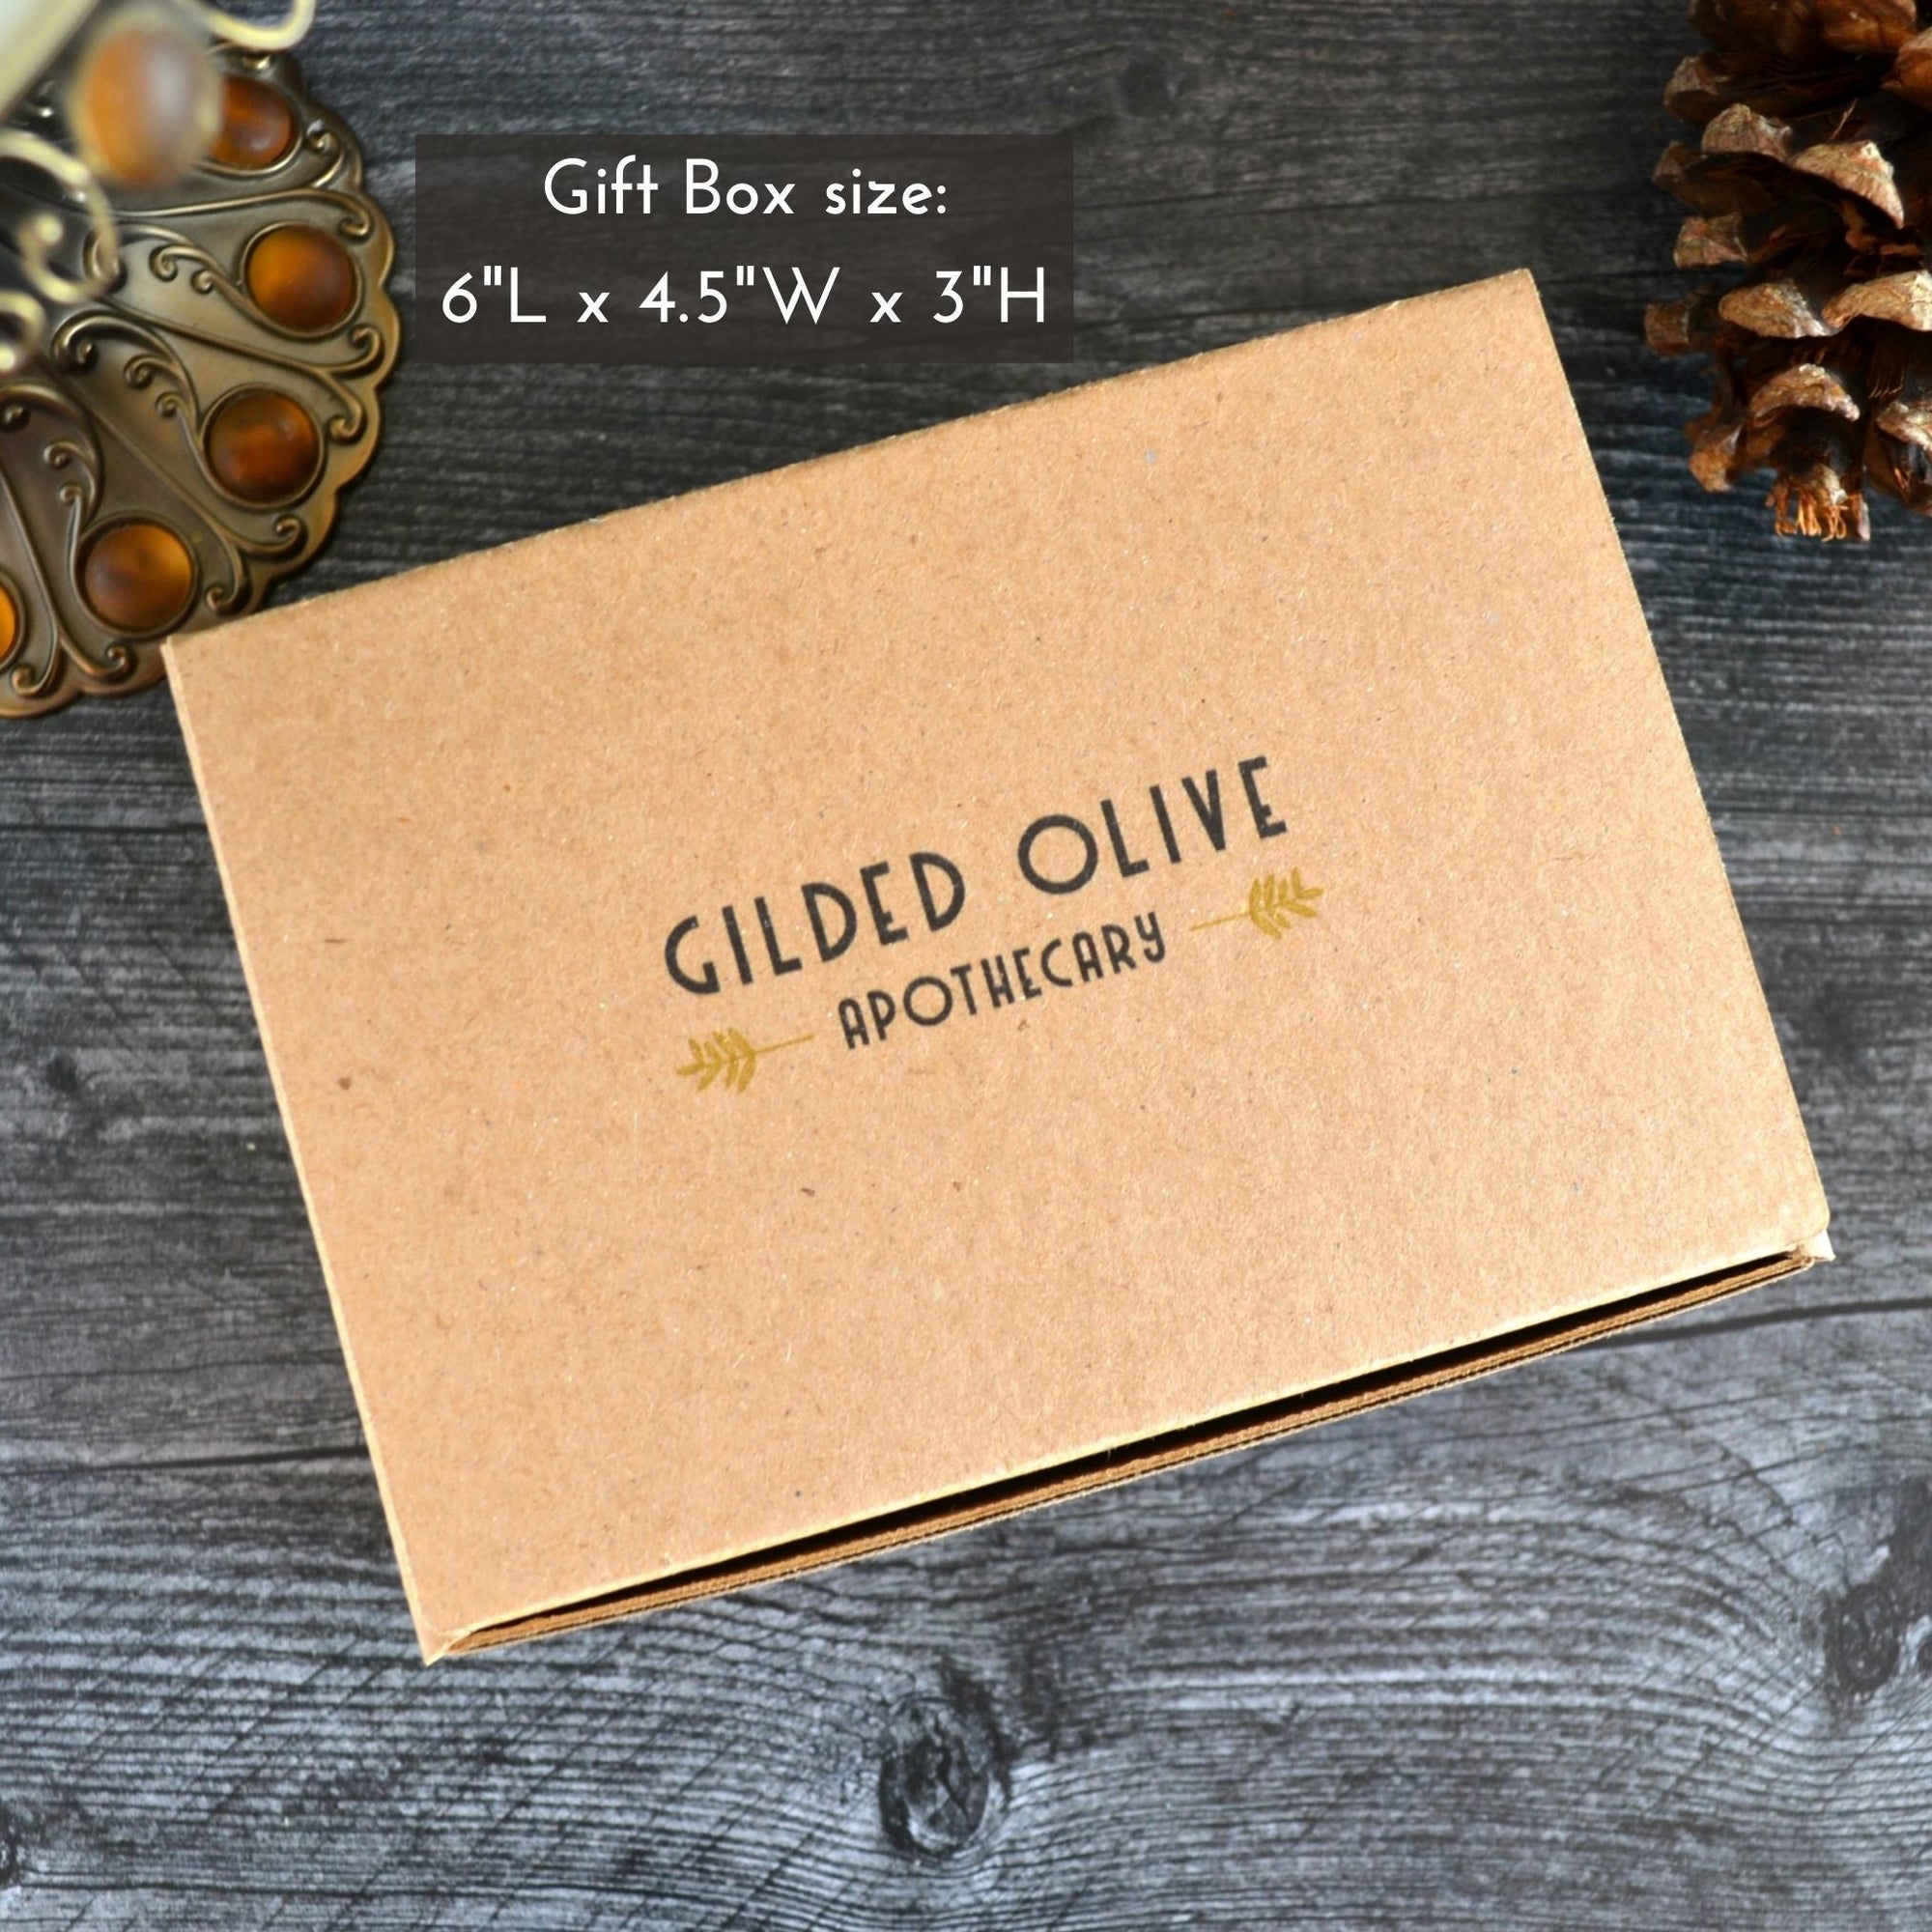 Gilded Olive Apothecary Gift Box Dimensions